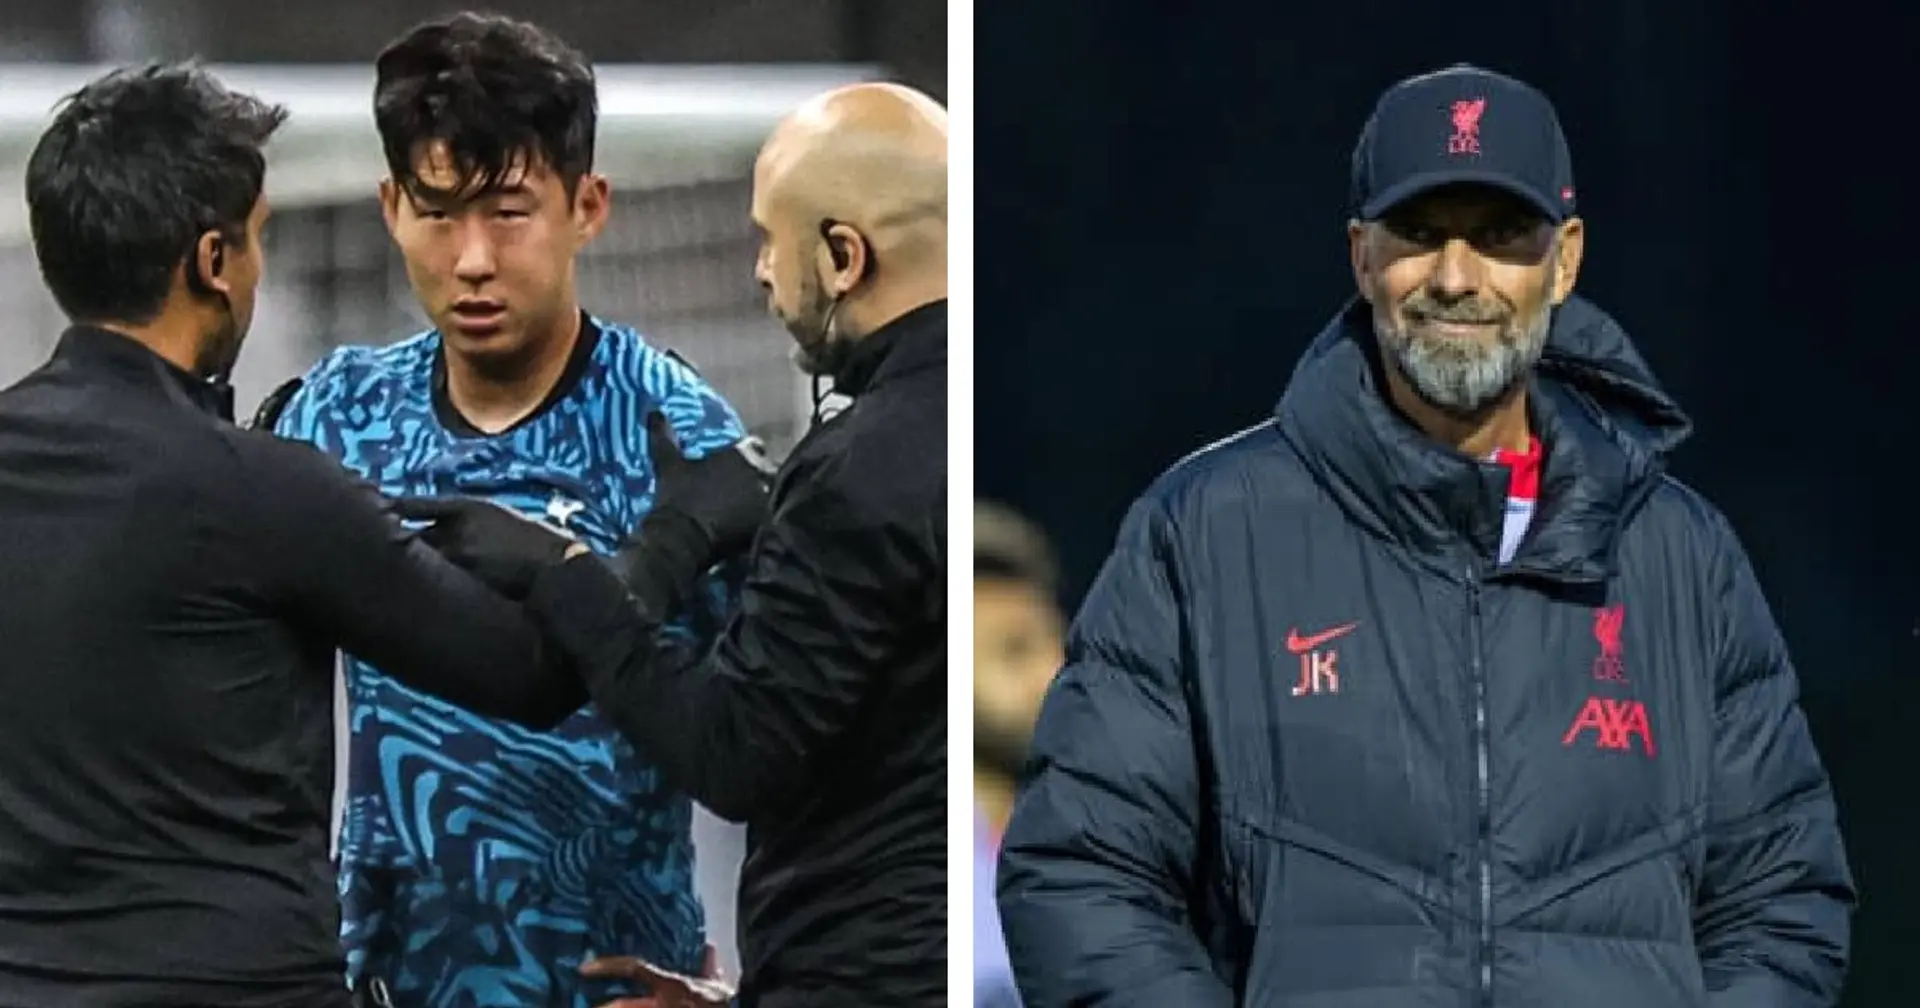 Tottenham star Son Heung-min set to miss Liverpool clash due to eye fracture